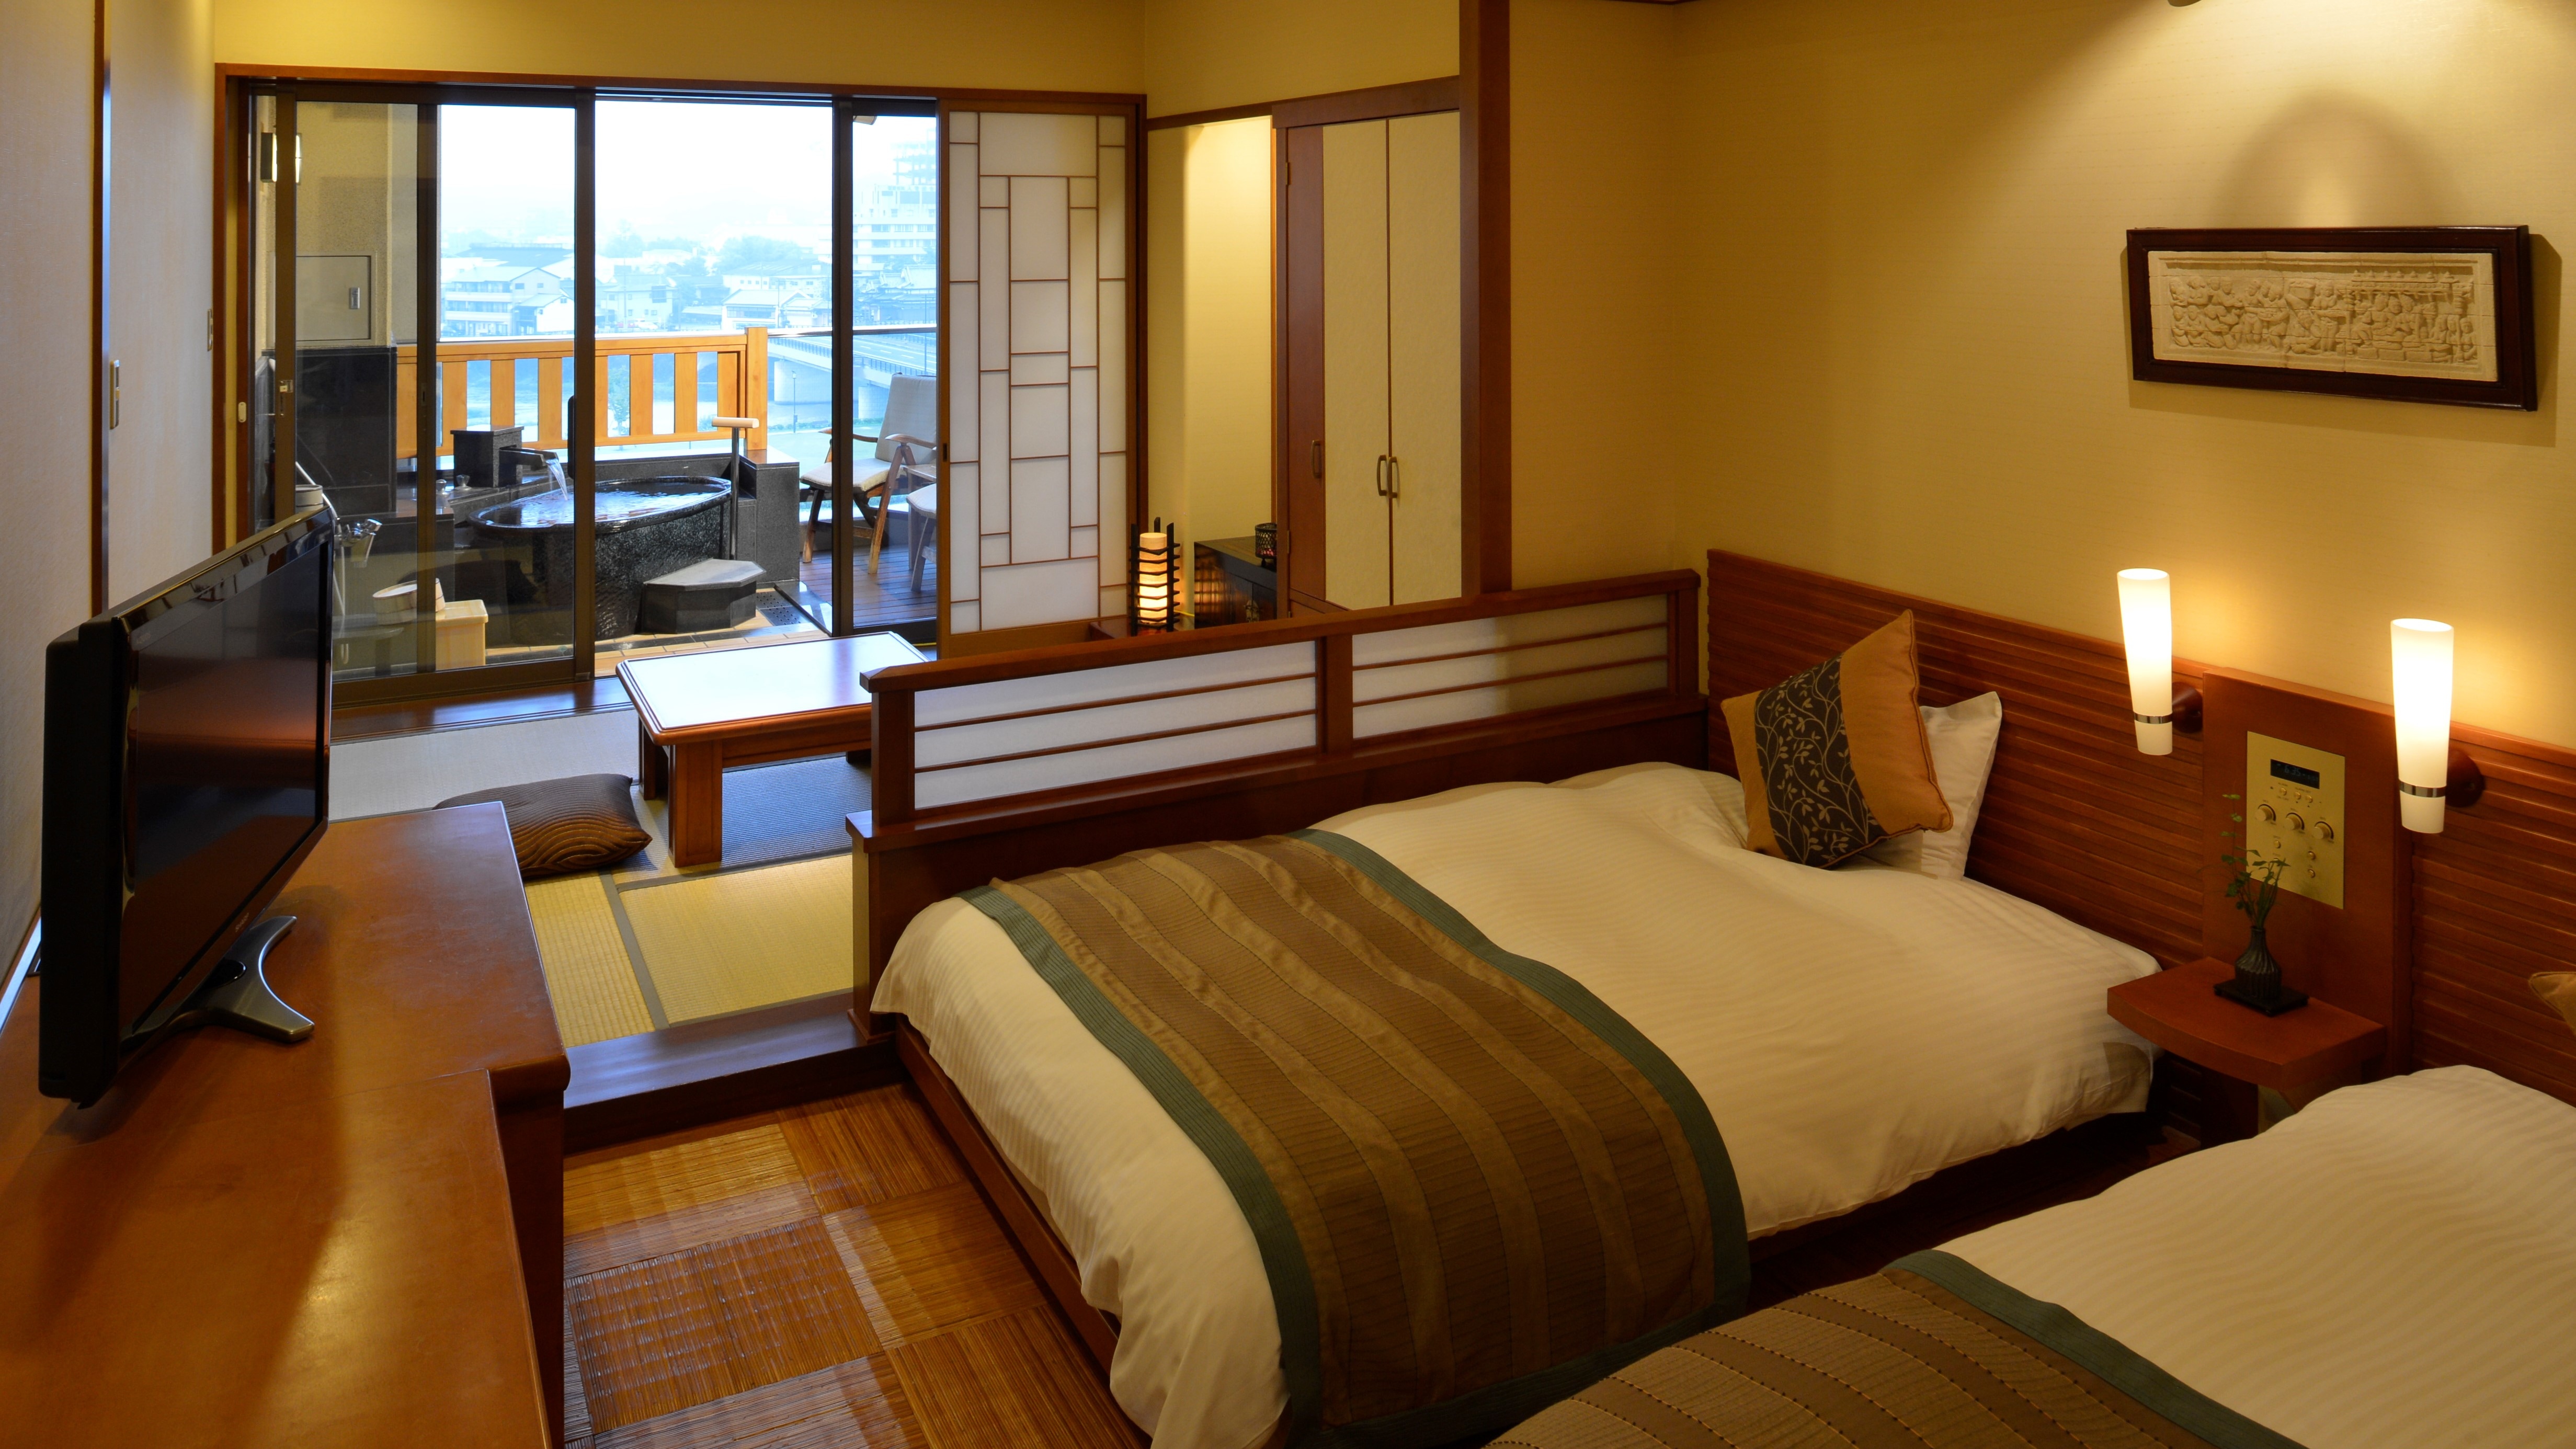 An example of a Japanese-Western style room with an open-air hot spring bath (4.5 tatami mats and twin)